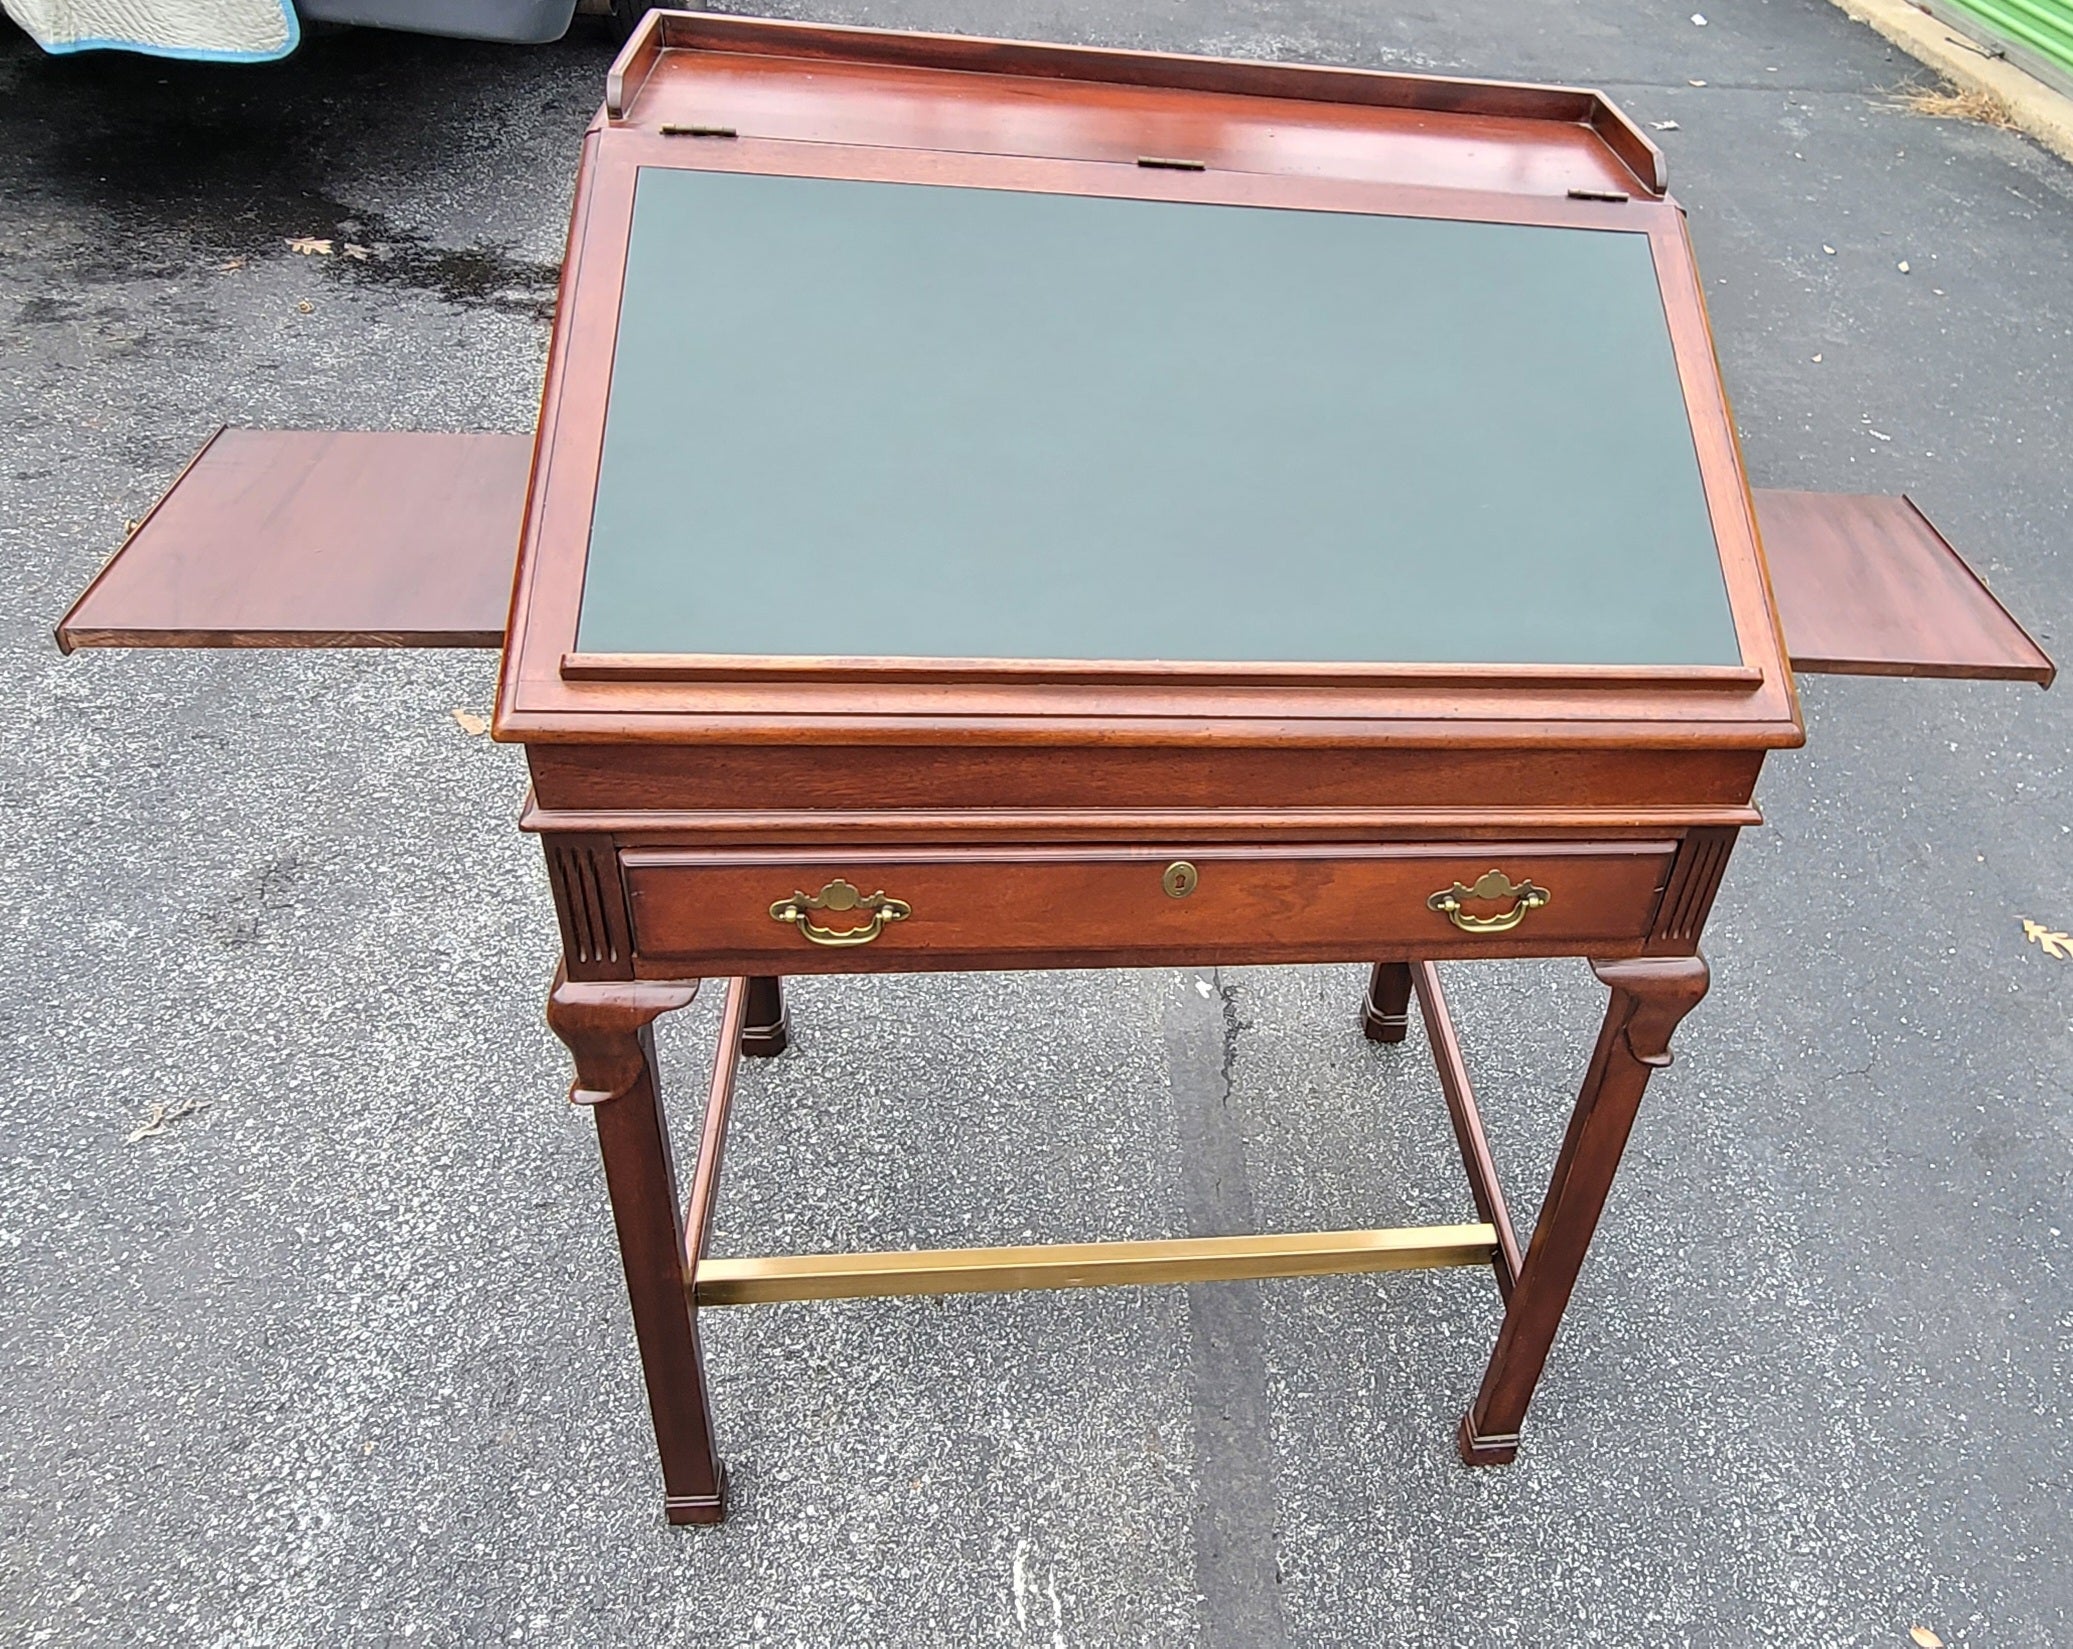 Lexington's Palmer Home Collection Mahogany Tooled Leather Drafting Desk W/ Tray In Excellent Condition For Sale In Germantown, MD